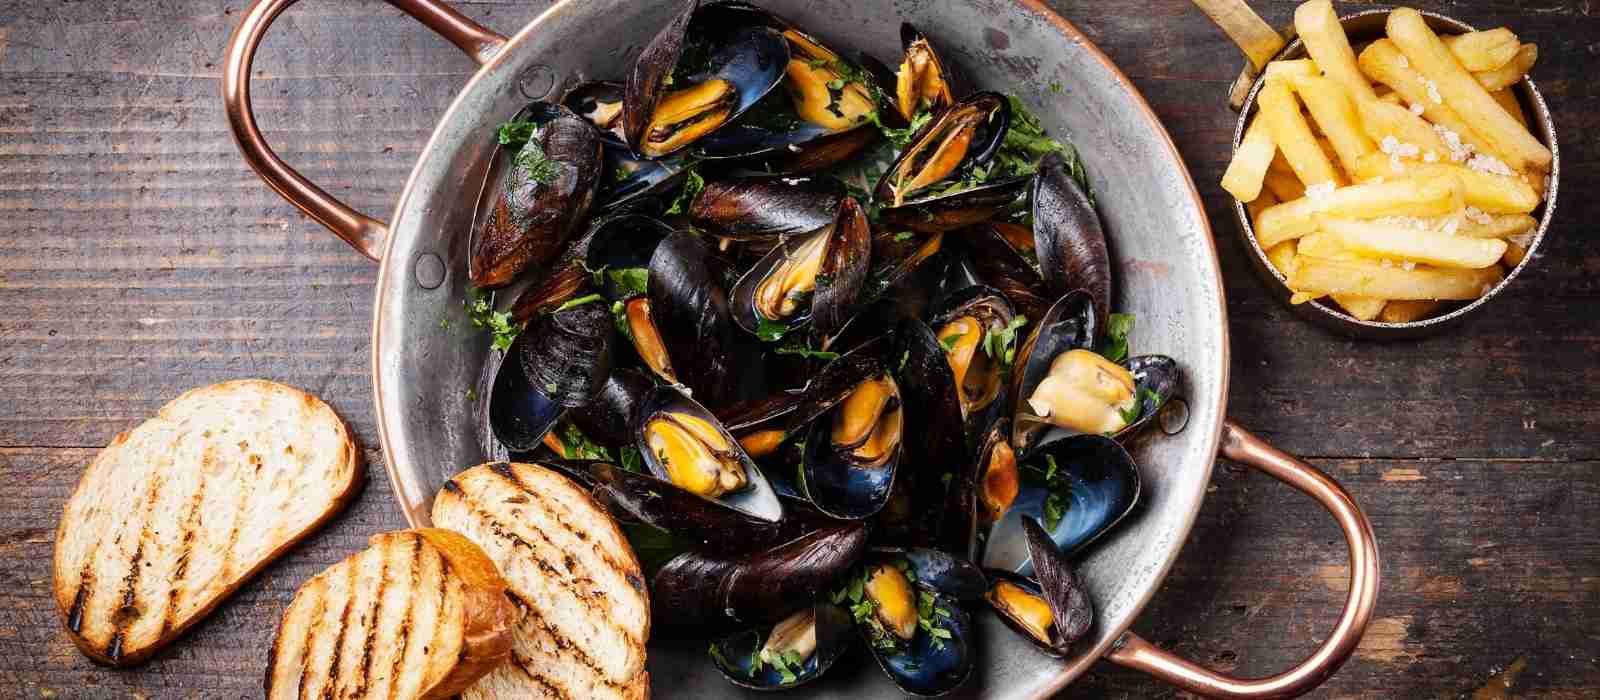 Can I Eat Mussels While Breastfeeding